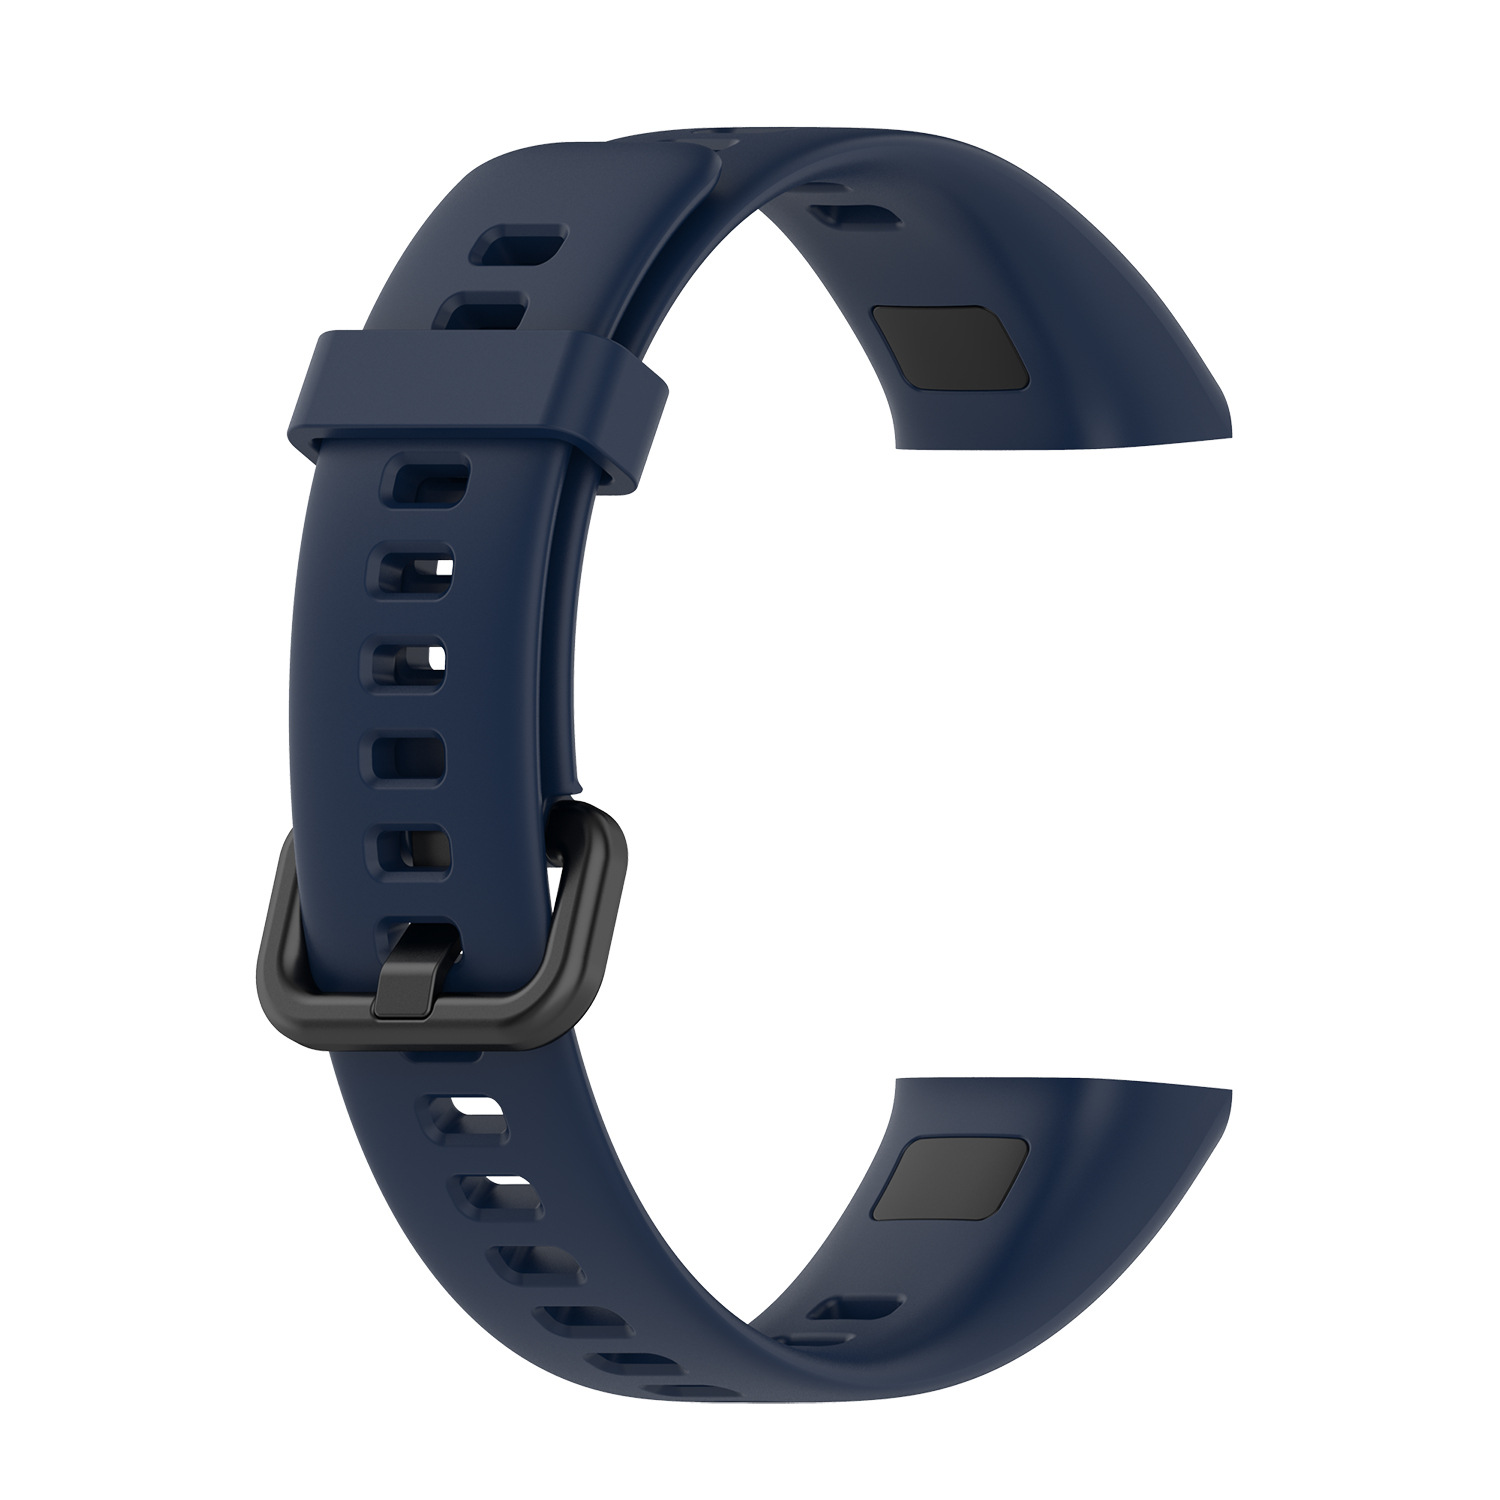 Suitable for HUAWEI band4 Huawei bracelet 4 official silicone monochrome fashion simple and durable watch strap (1627207:28340:sort by color:Navy blue;149238345:20443016495:strap size:HUAWEI band4 表带)